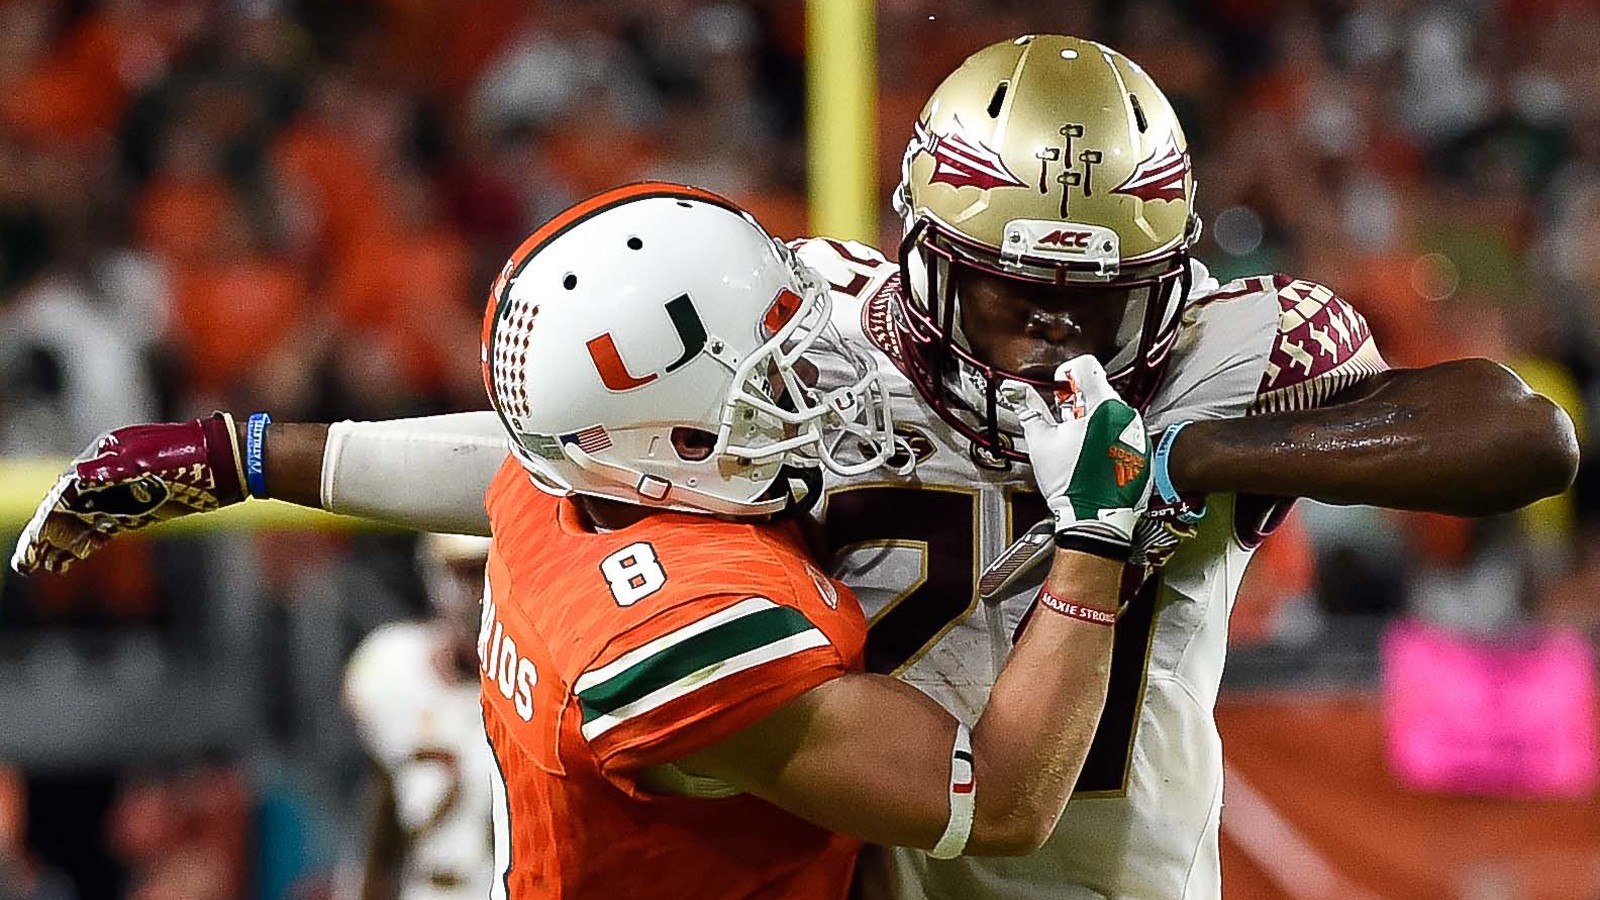 Miami's game at Florida State moved to Oct. 7